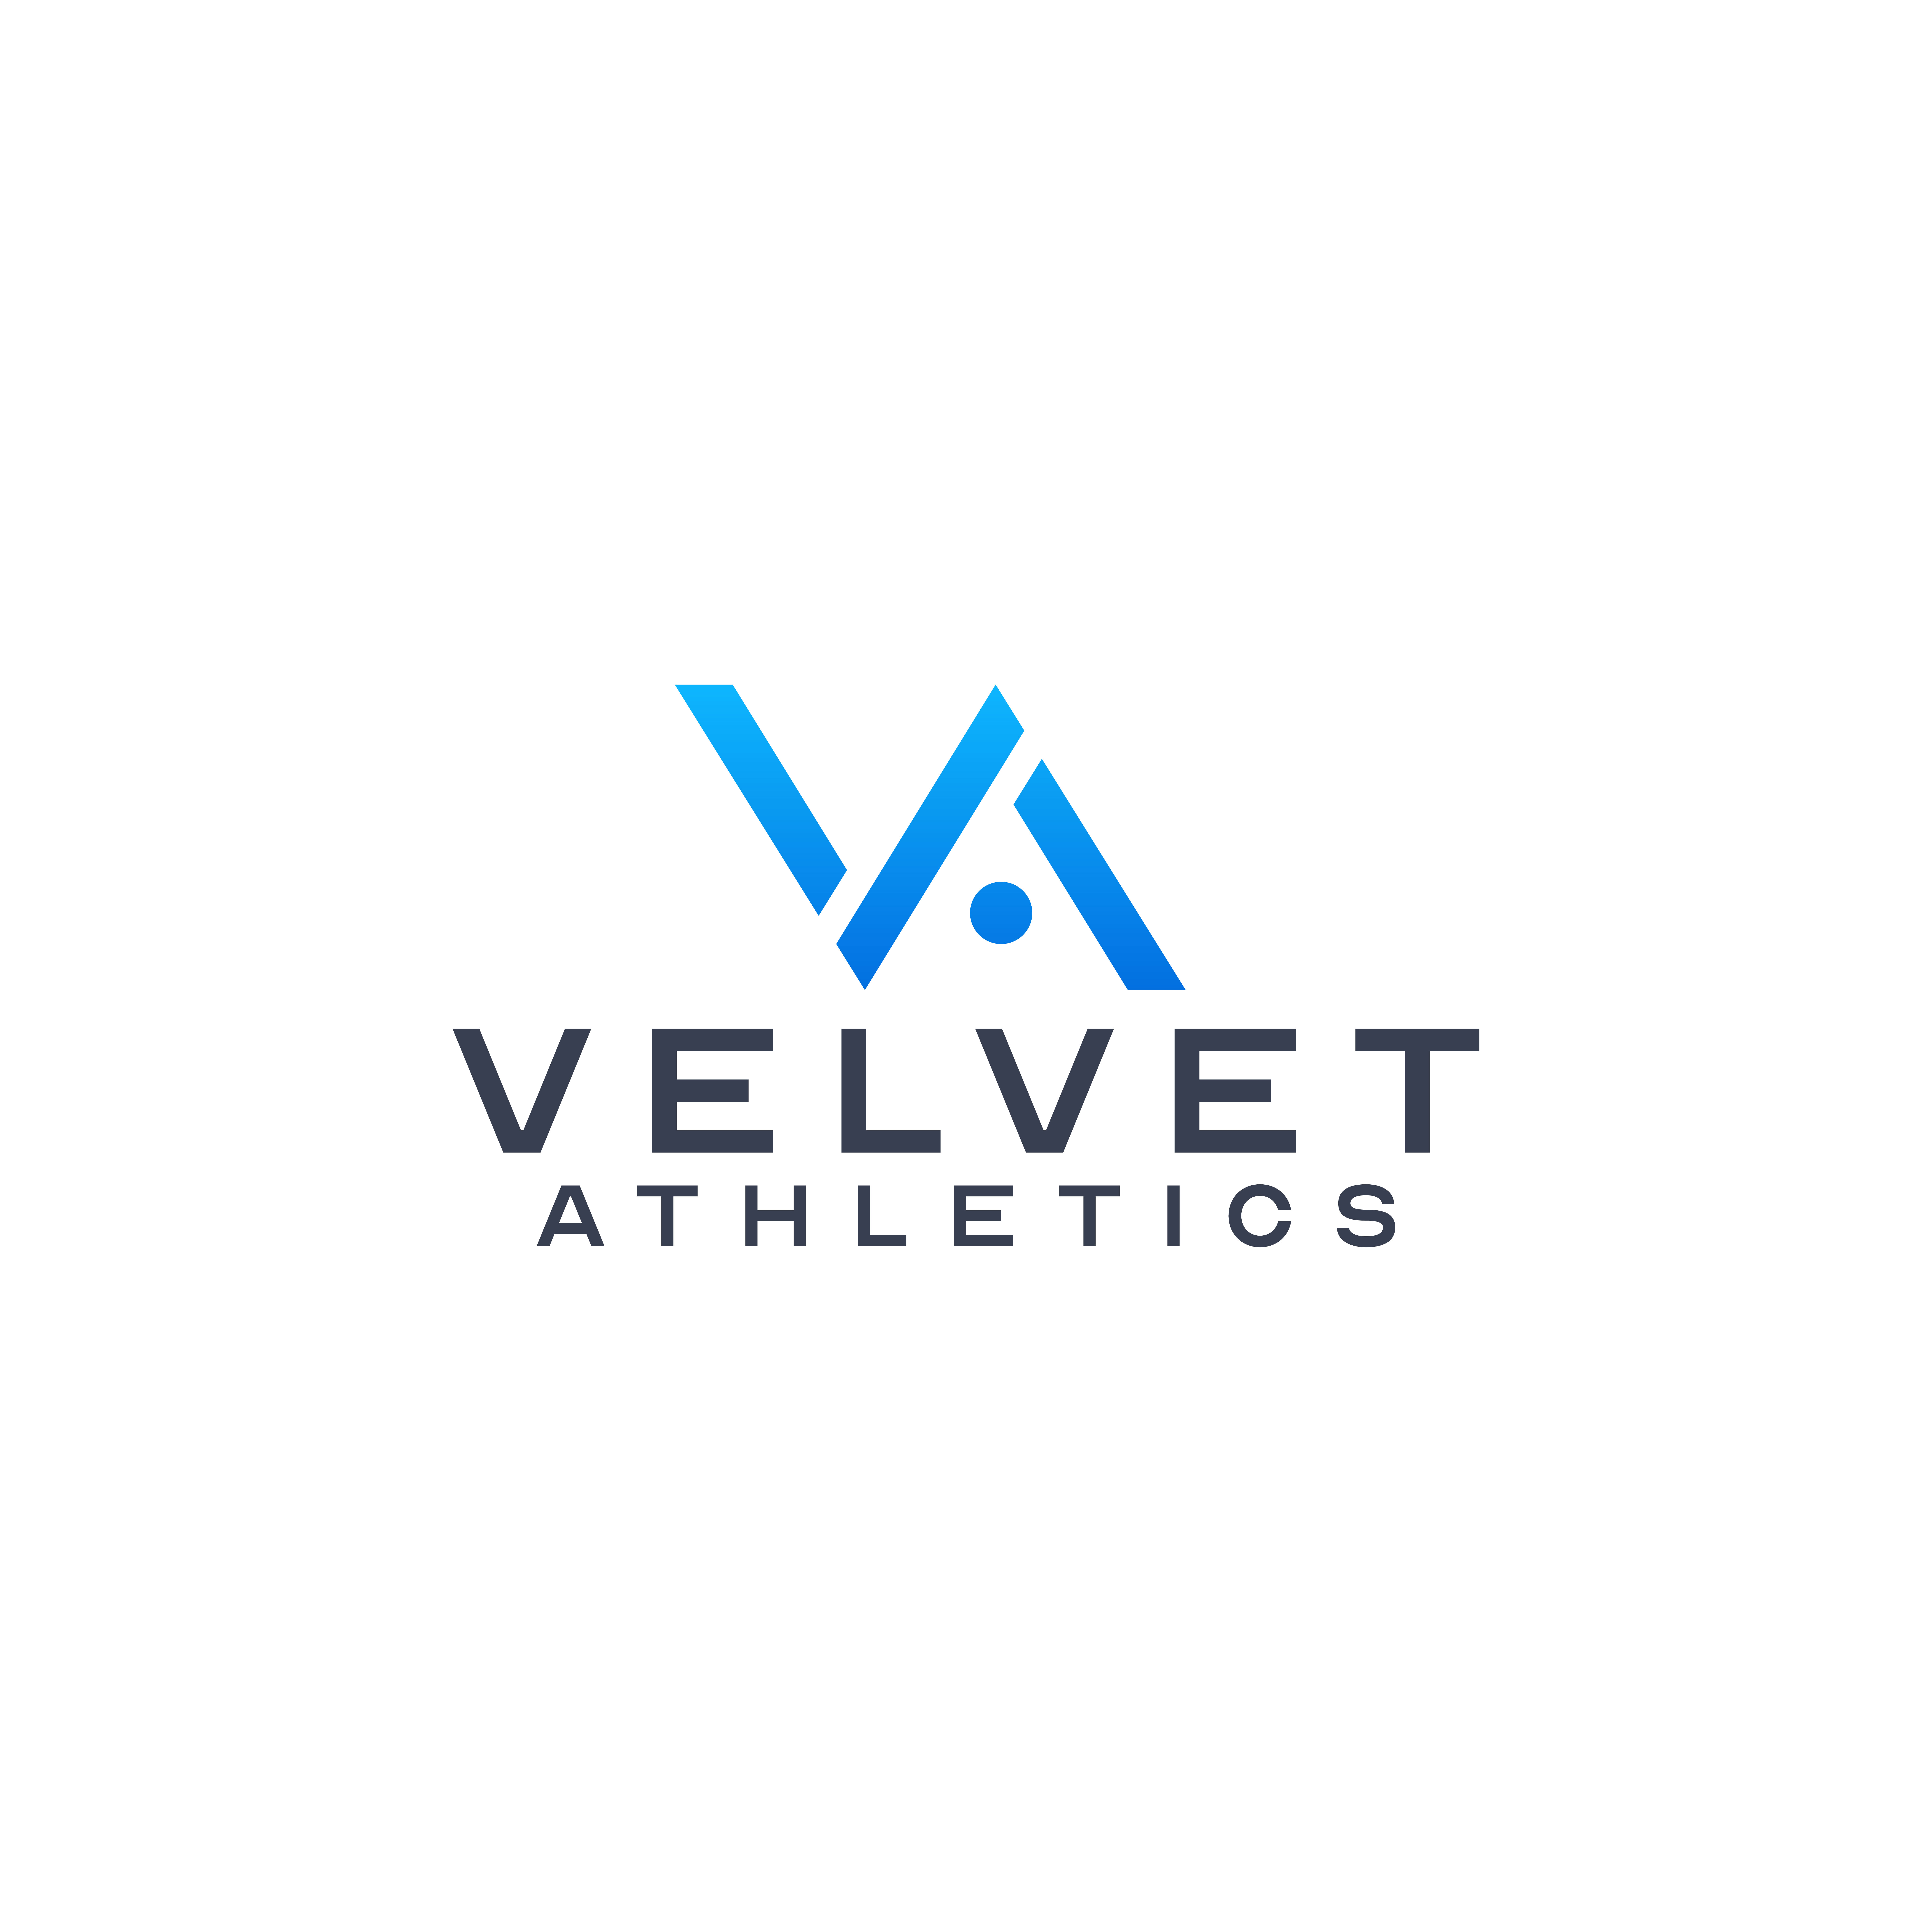 The image shows the logo for Velvet Athletics. The logo consists of the initials "VA" in a modern, stylized blue font with a small, solid blue circle integrated into the design. Below the initials, "VELVET ATHLETICS" is written in bold, uppercase black letters. The background is white.